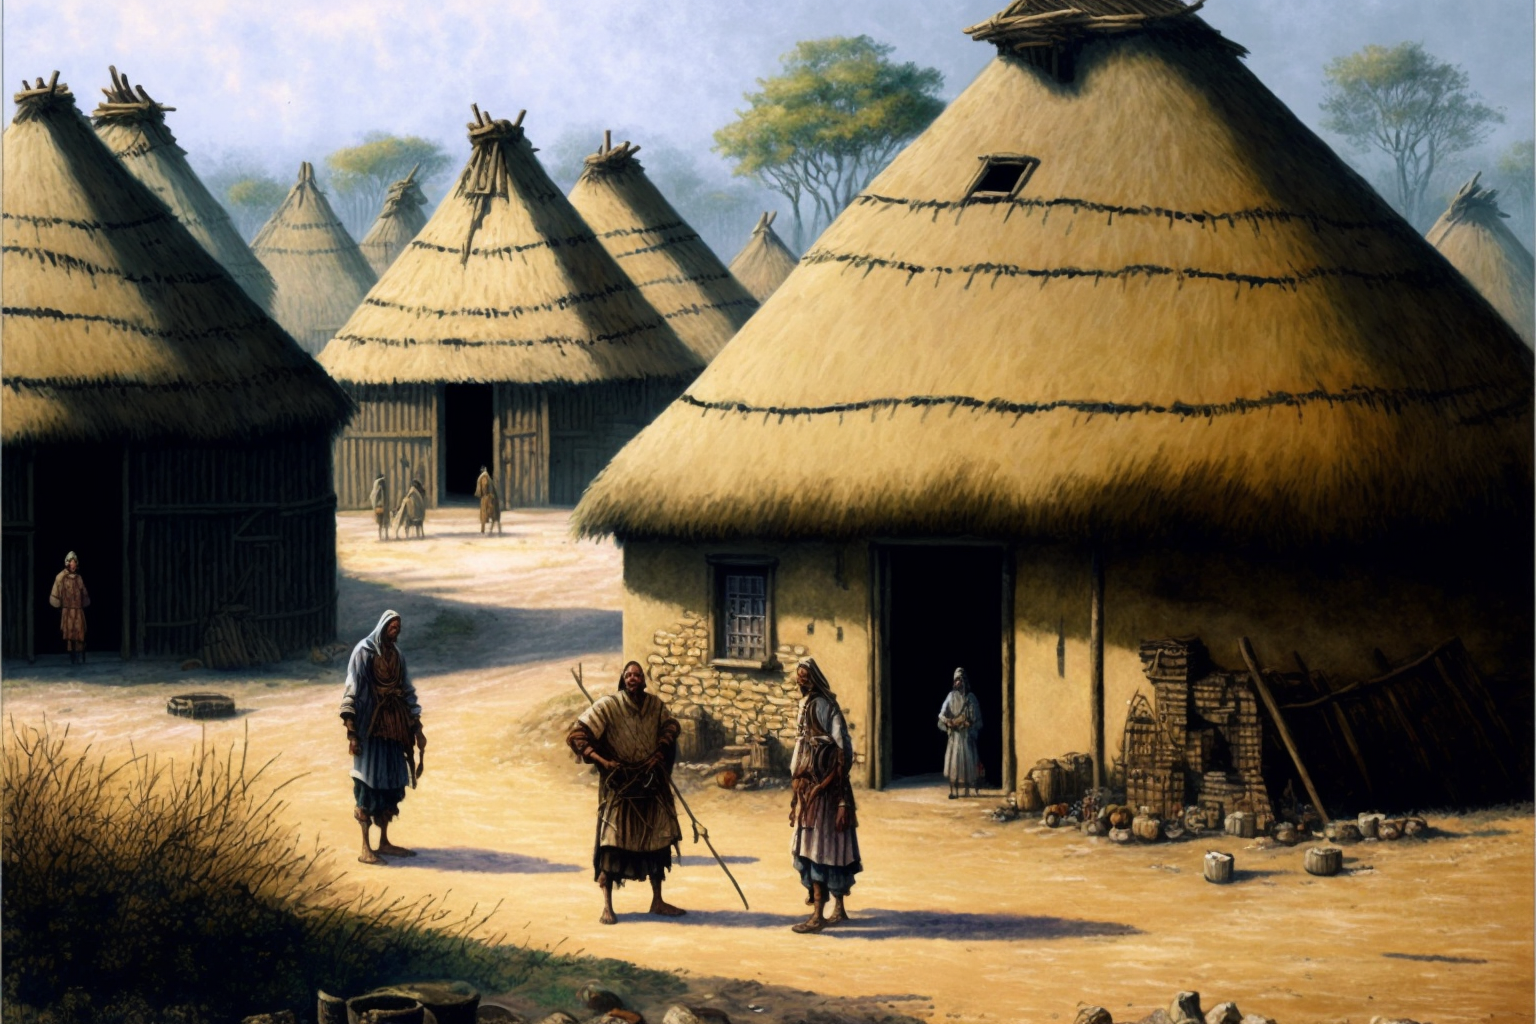 villagers in front of thatched huts in a stone-age